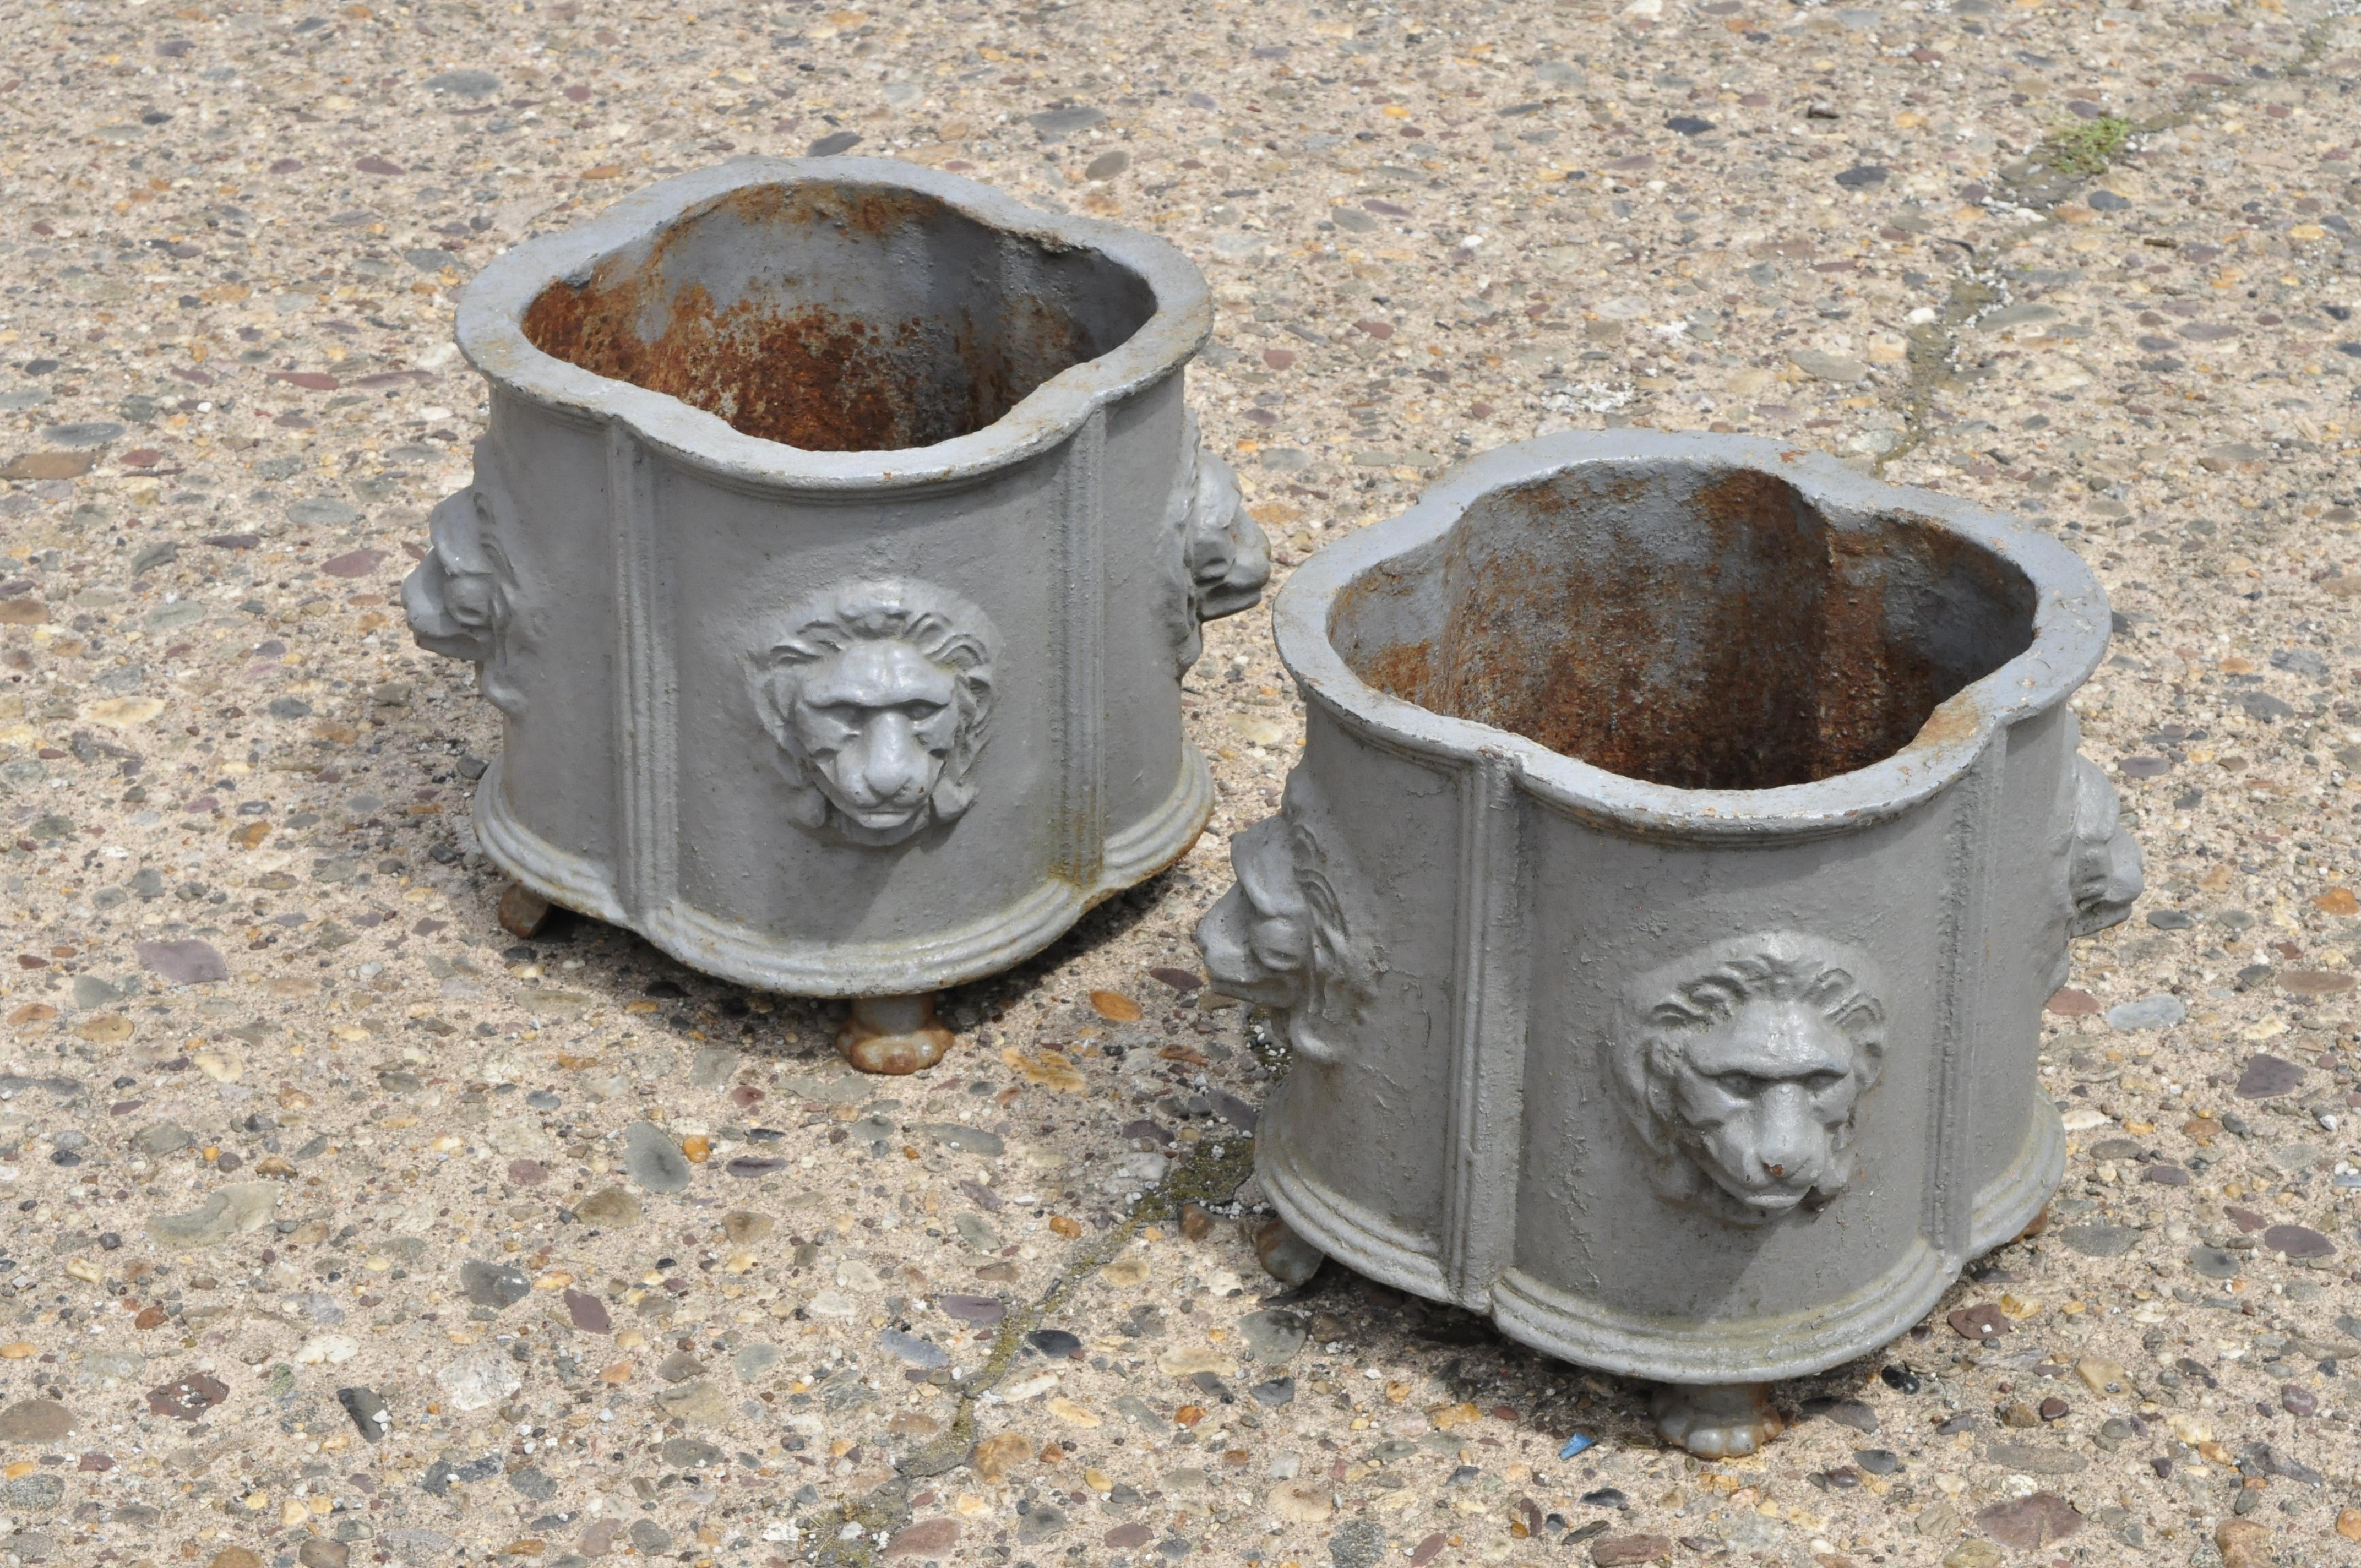 Pair of antique cast iron French Empire style planter pots with lion heads. Items feature lion heads, paw feet, cast iron construction, quality craftsmanship, great style and form, circa mid-20th century. Measurements: 10.5